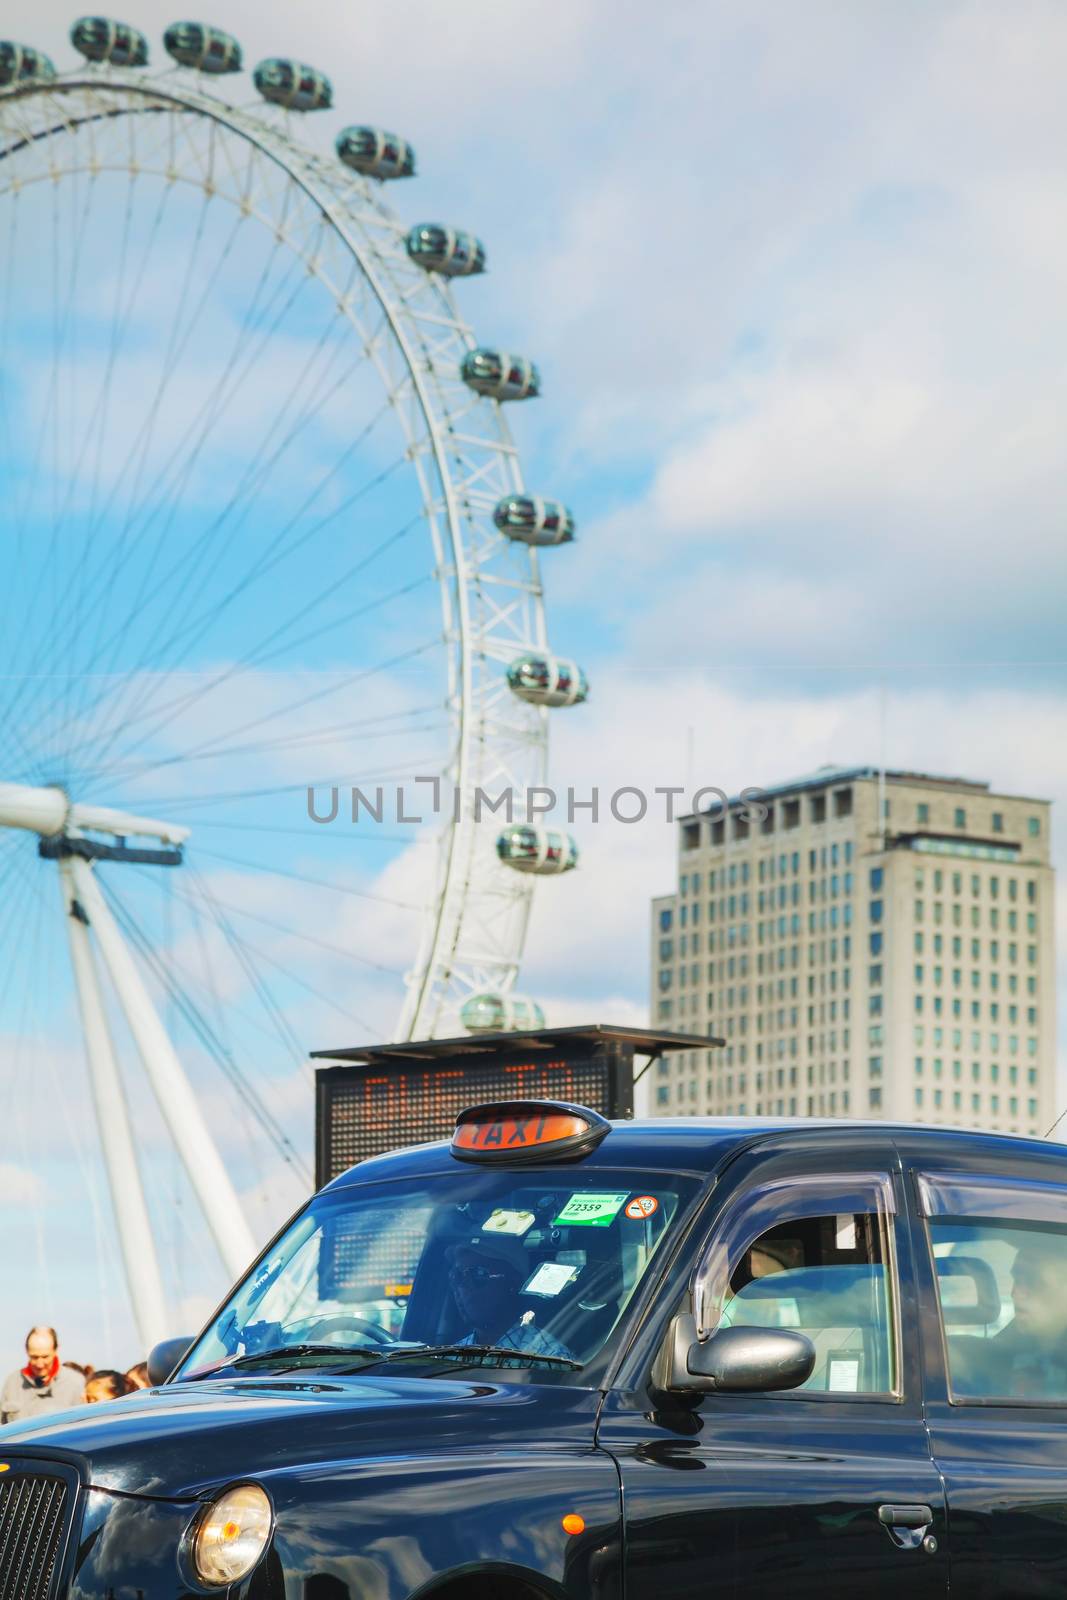 Famous black cab an a street in London by AndreyKr